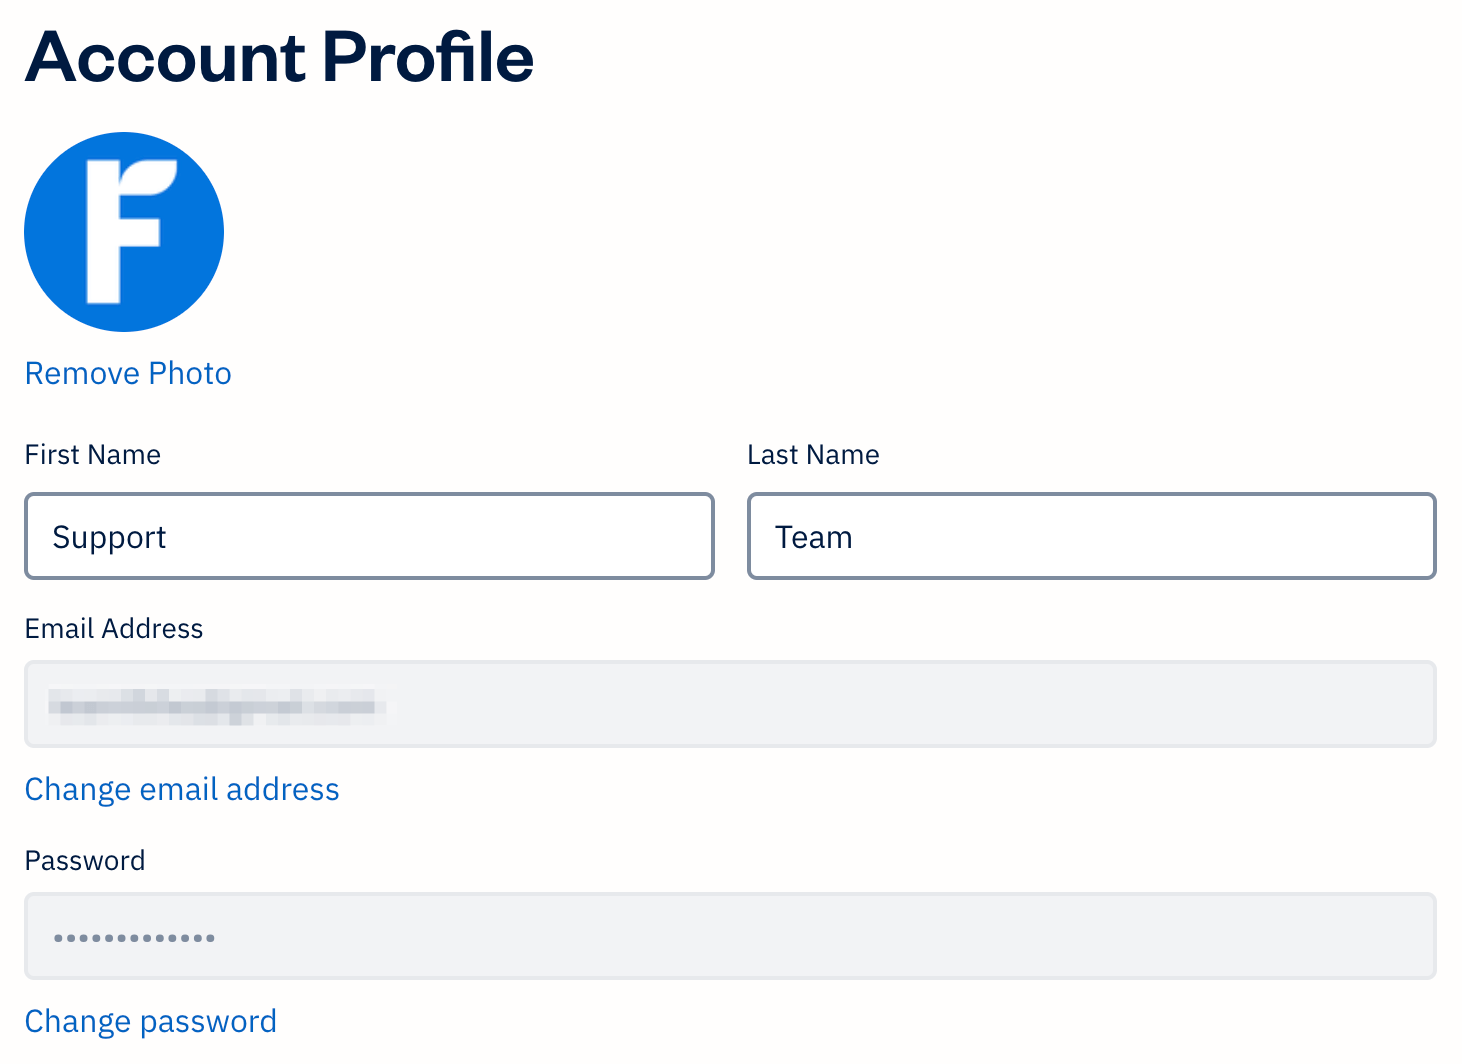 Account section with fields to fill out.